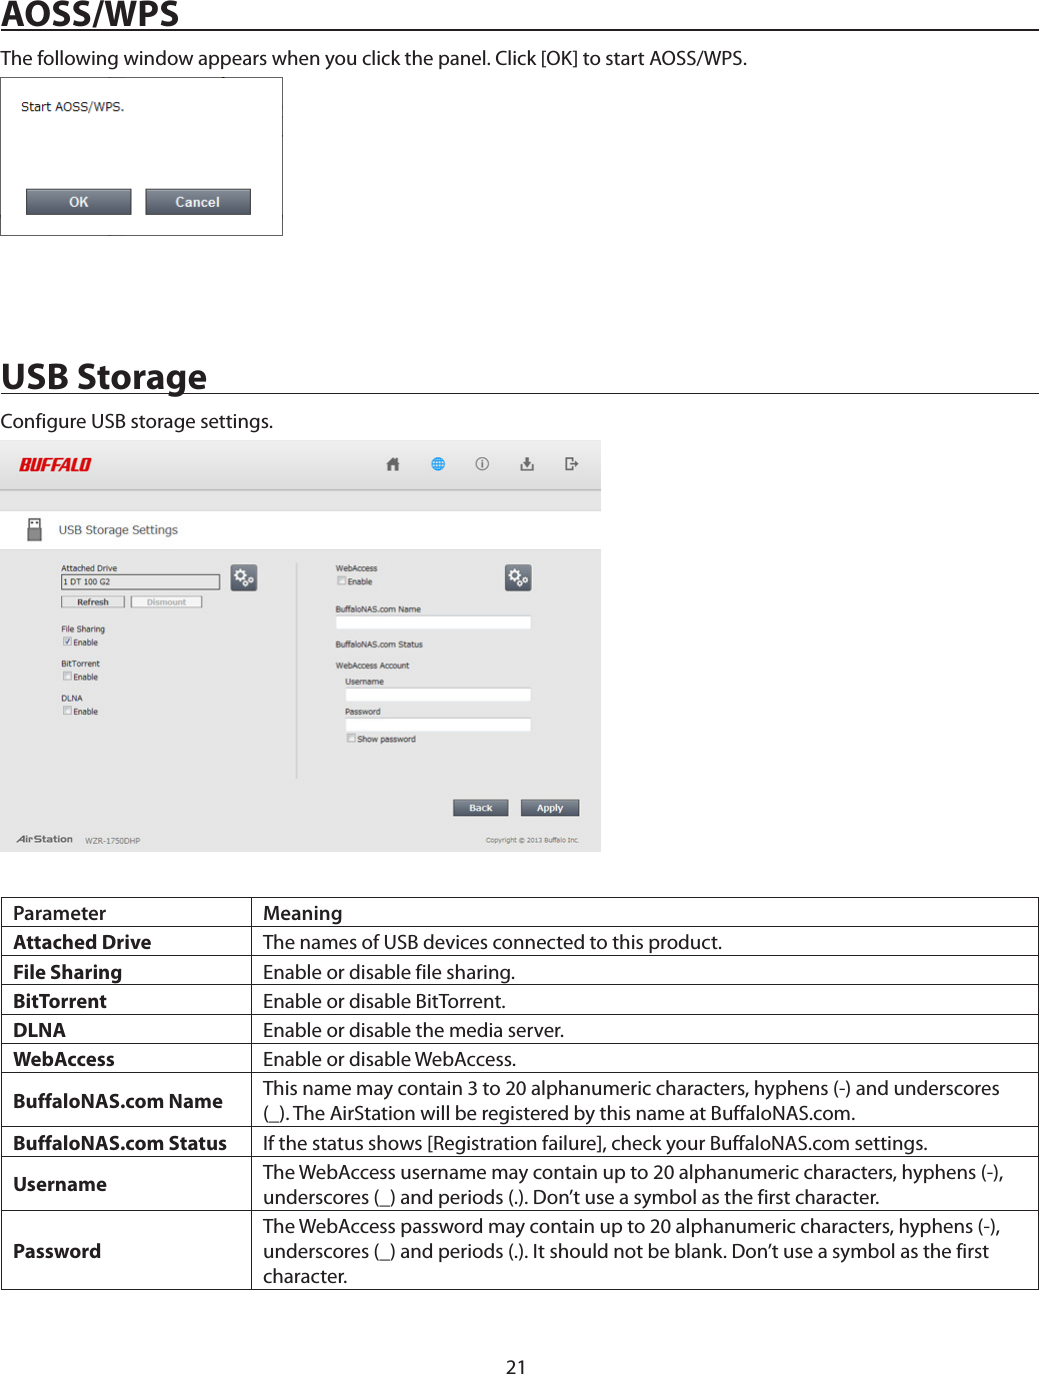 21AOSS/WPSThe following window appears when you click the panel. Click [OK] to start AOSS/WPS.USB StorageConfigure USB storage settings.Parameter MeaningAttached Drive The names of USB devices connected to this product.File Sharing Enable or disable file sharing.BitTorrent Enable or disable BitTorrent.DLNA Enable or disable the media server.WebAccess Enable or disable WebAccess.BuffaloNAS.com Name This name may contain 3 to 20 alphanumeric characters, hyphens (-) and underscores (_). The AirStation will be registered by this name at BuffaloNAS.com.BuffaloNAS.com Status If the status shows [Registration failure], check your BuffaloNAS.com settings.Username The WebAccess username may contain up to 20 alphanumeric characters, hyphens (-), underscores (_) and periods (.). Don’t use a symbol as the first character.PasswordThe WebAccess password may contain up to 20 alphanumeric characters, hyphens (-), underscores (_) and periods (.). It should not be blank. Don’t use a symbol as the first character.